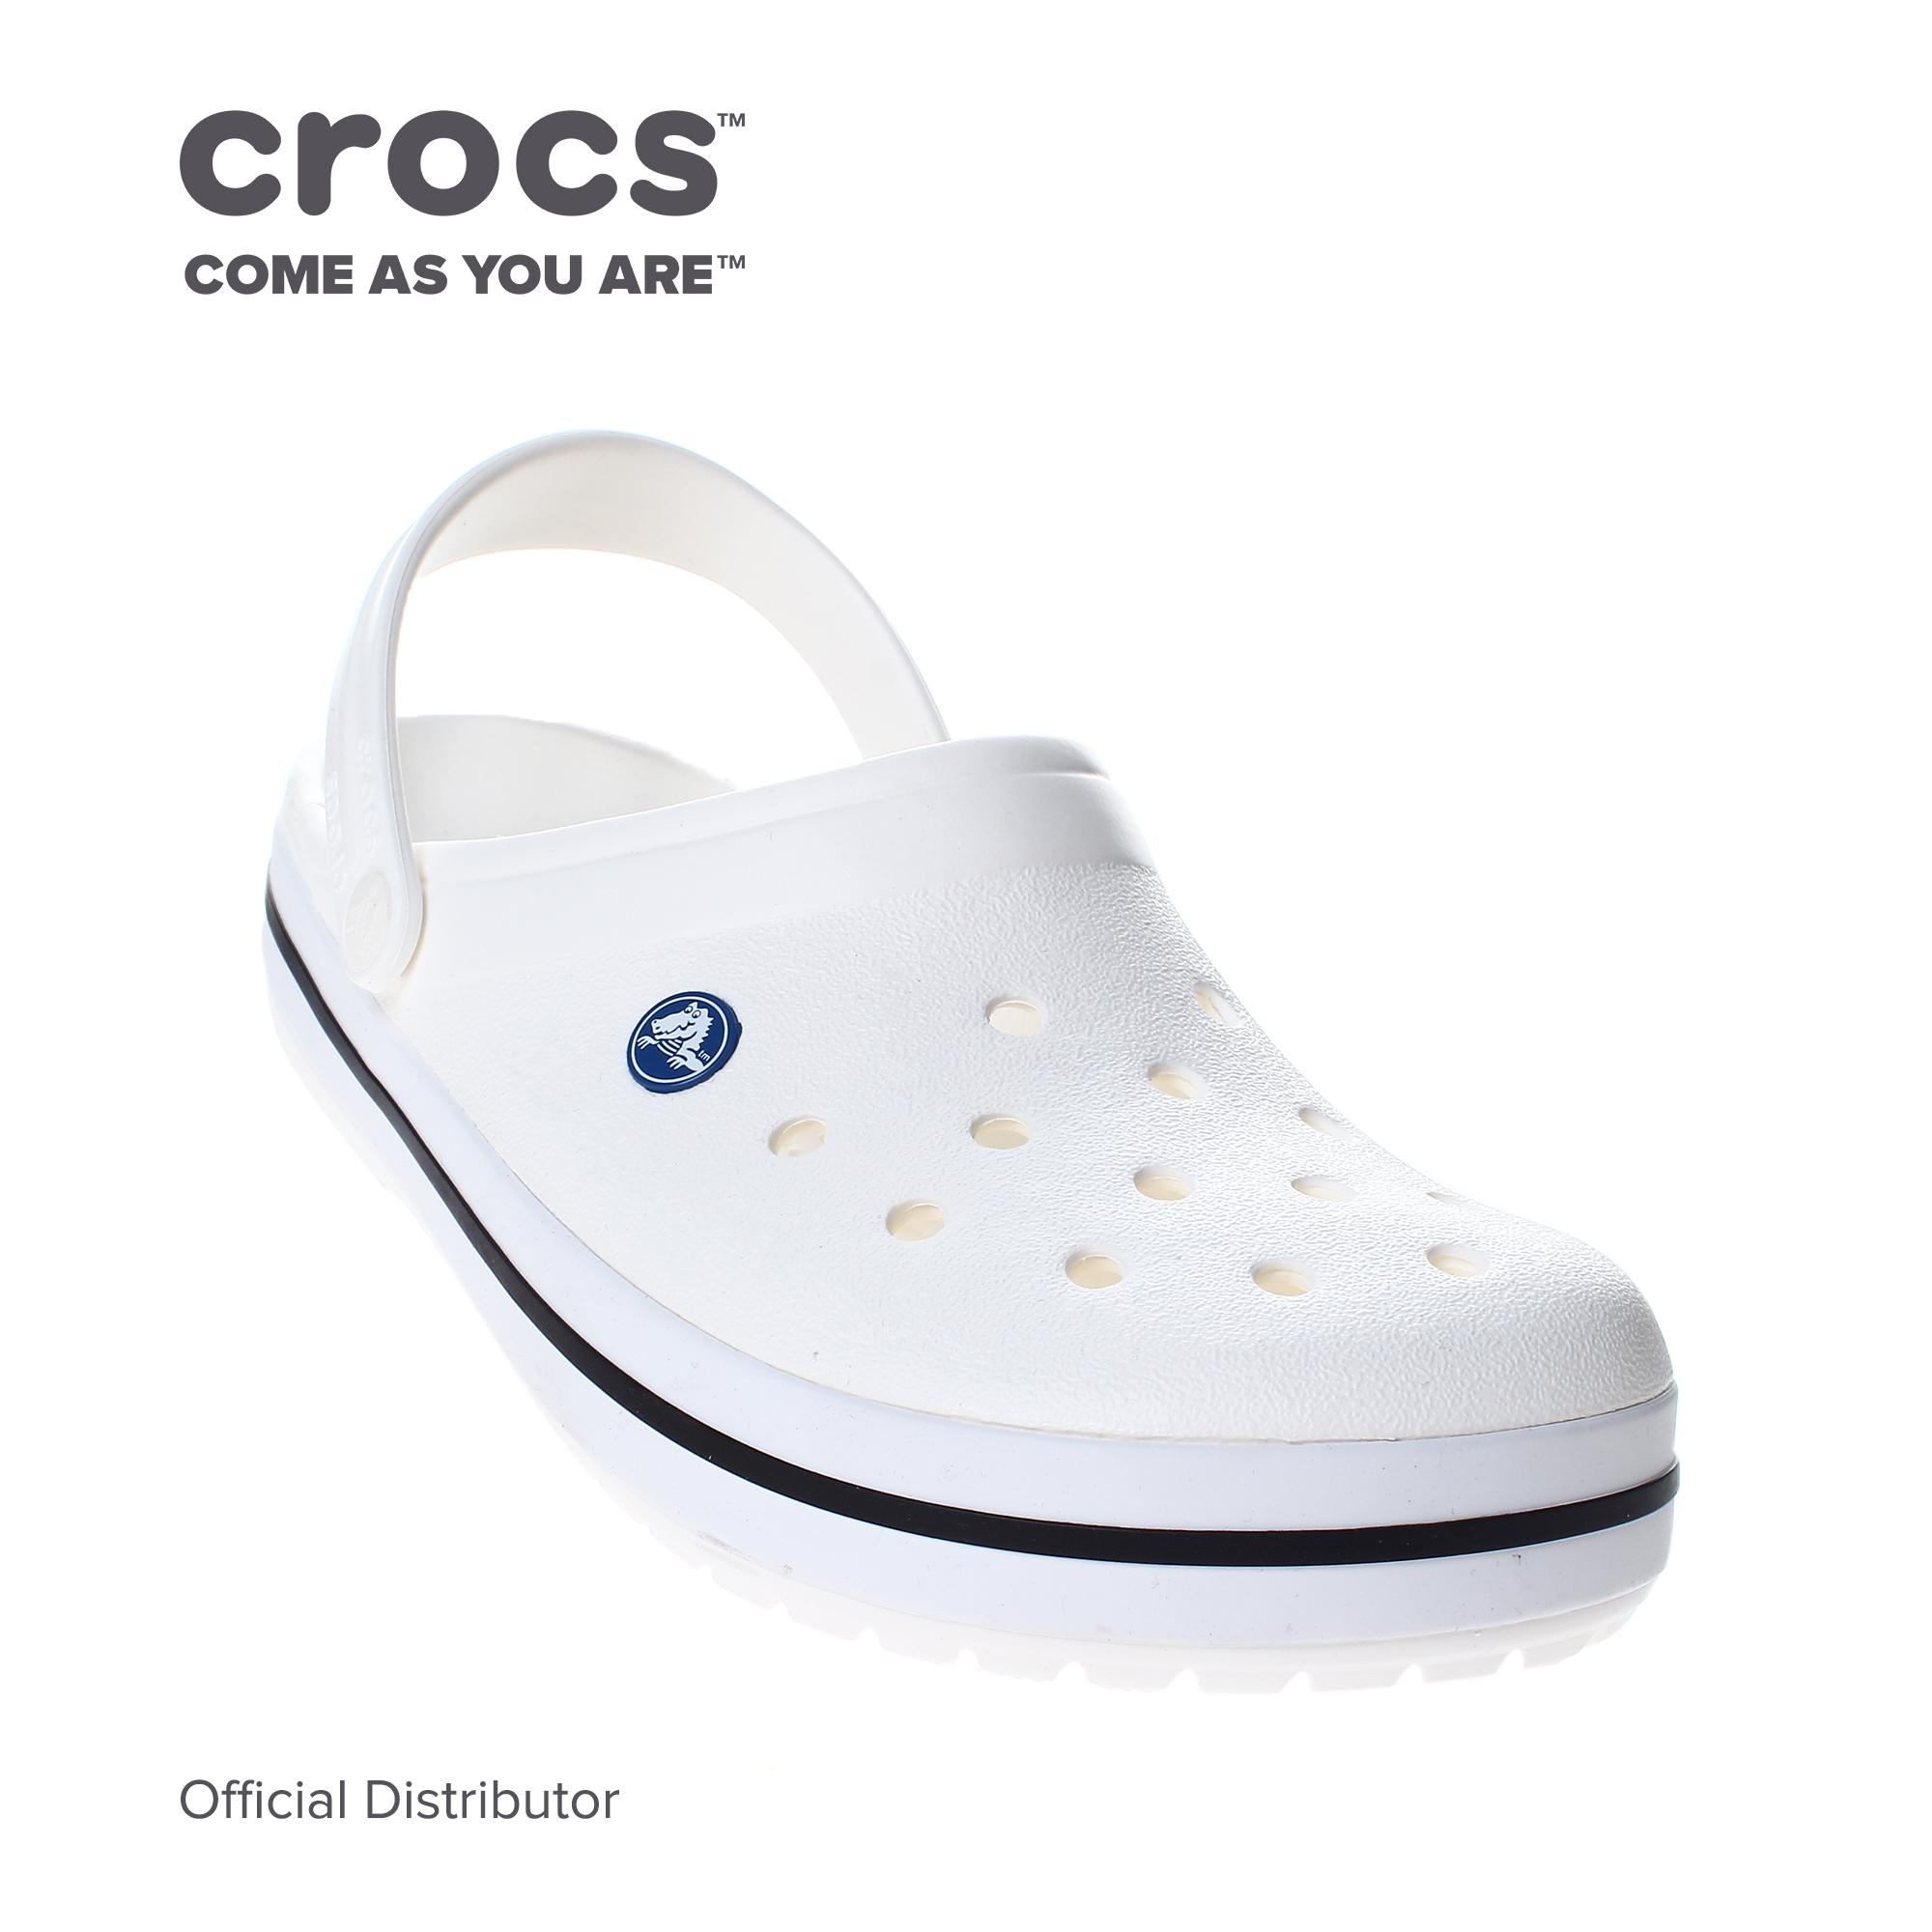 where can i find crocs shoes